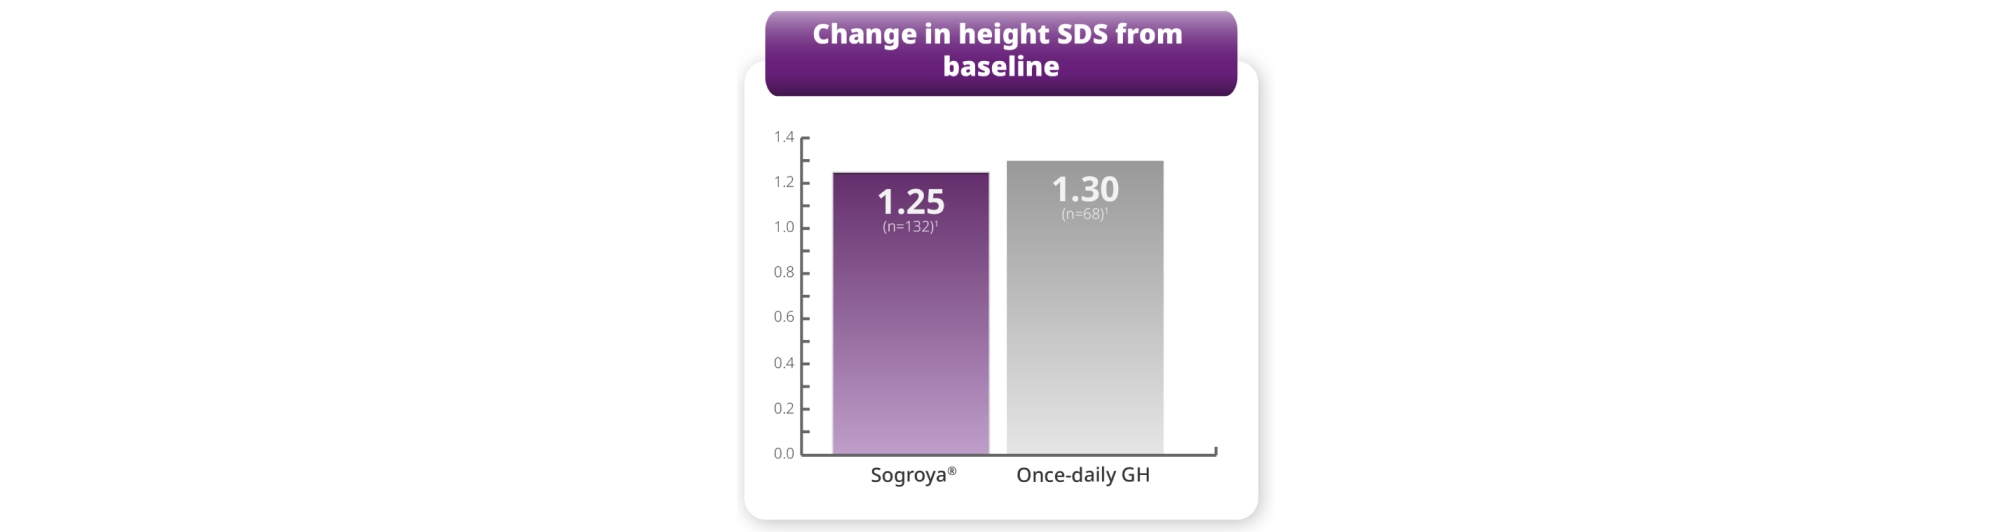 change in height SDS from baseline